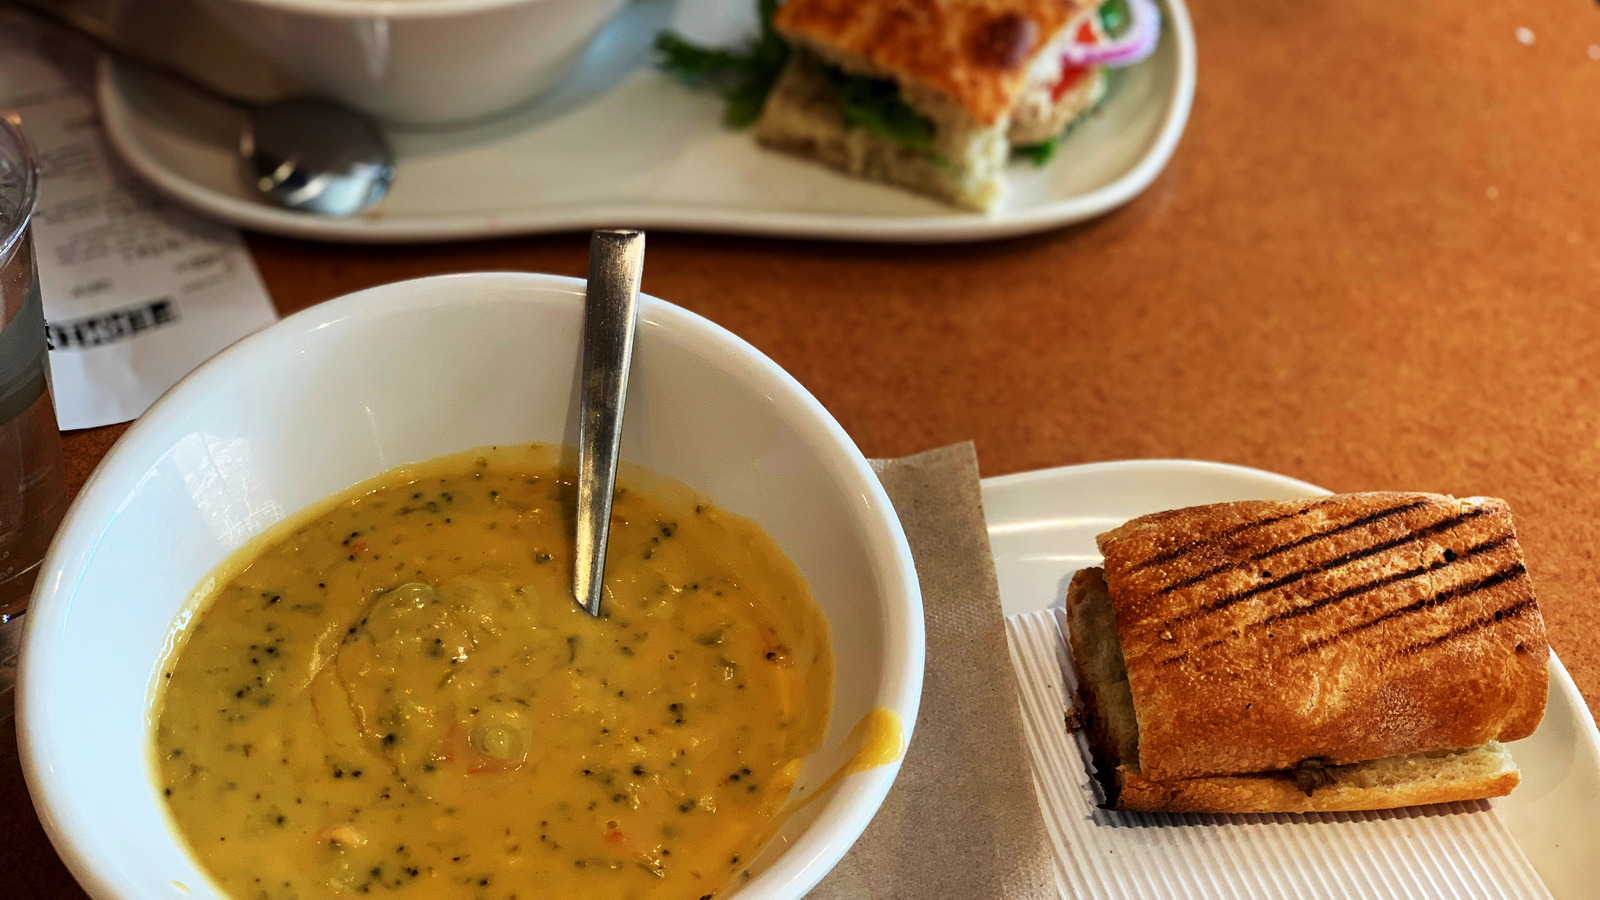 Nearly 40% Of People Say This Is The Best Soup At Panera